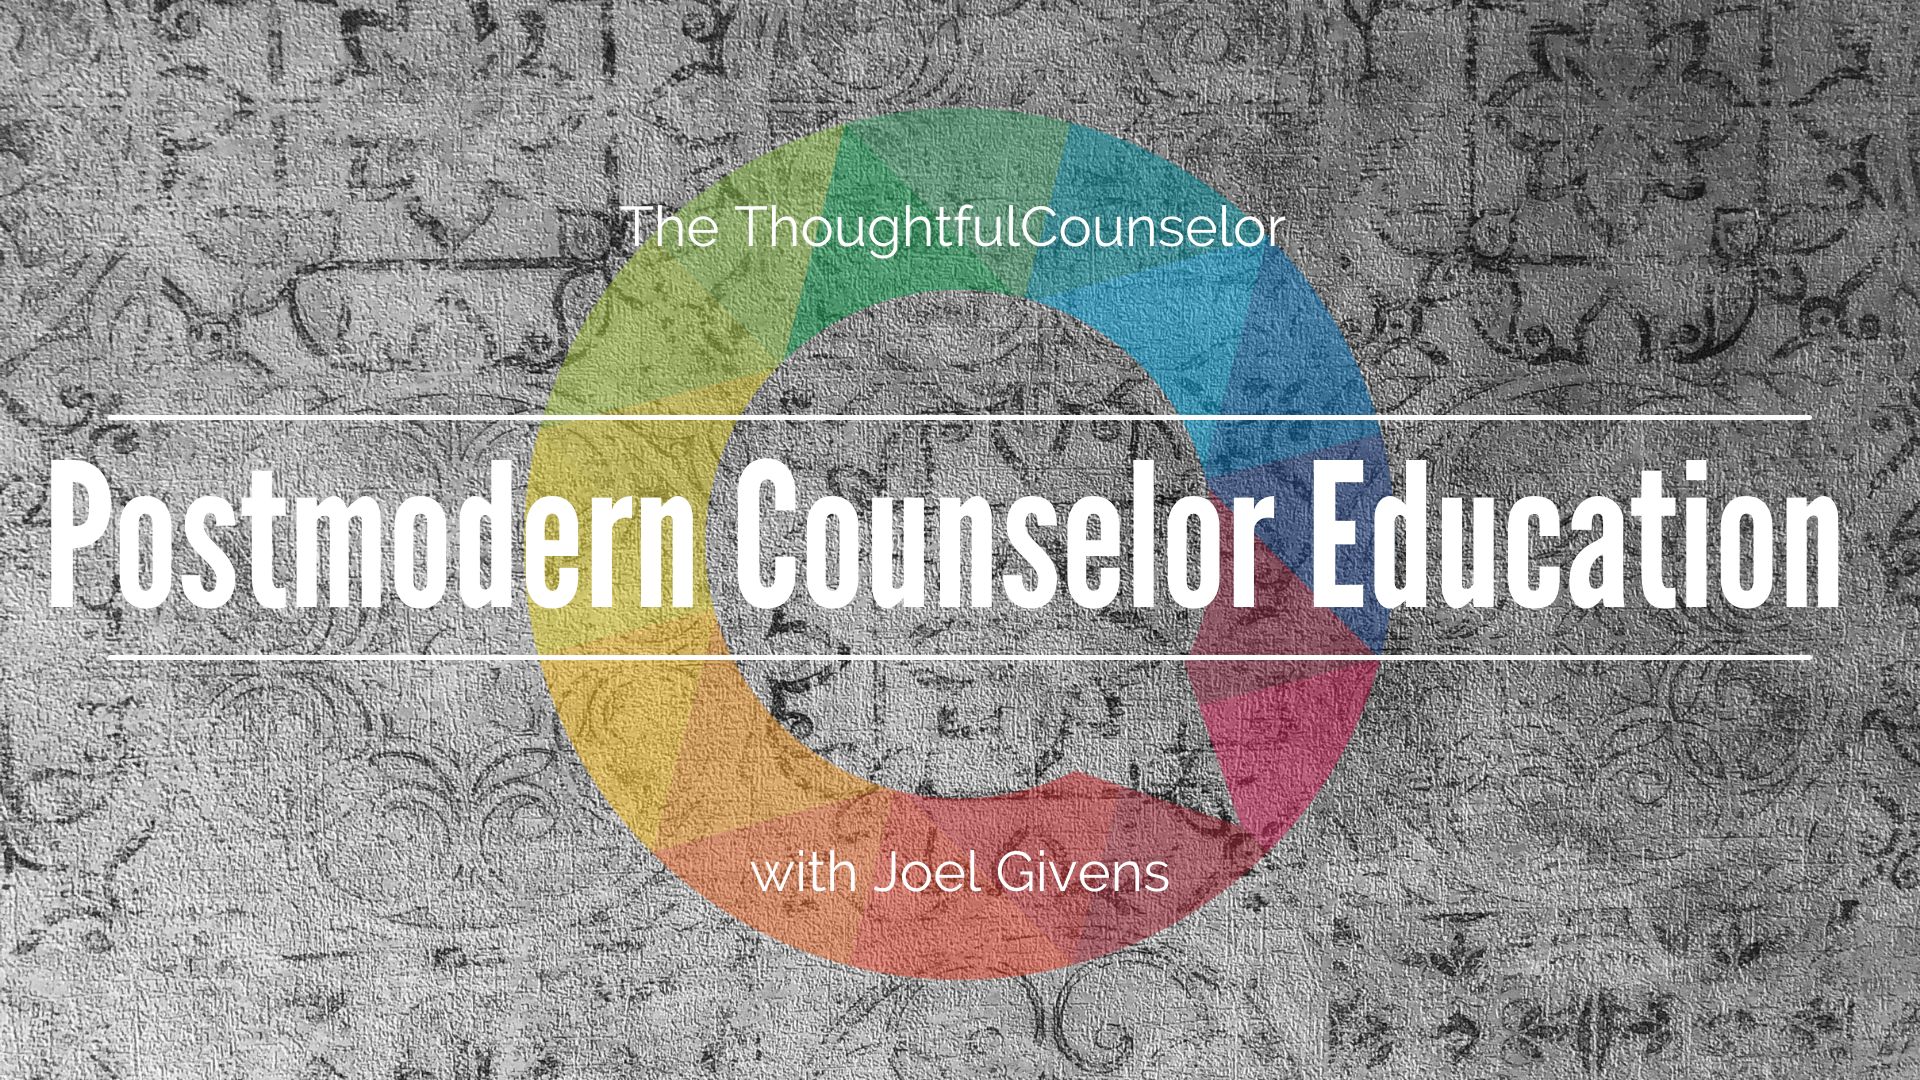 Postmodern Counselor Education—Foucault and the Developing Counselor